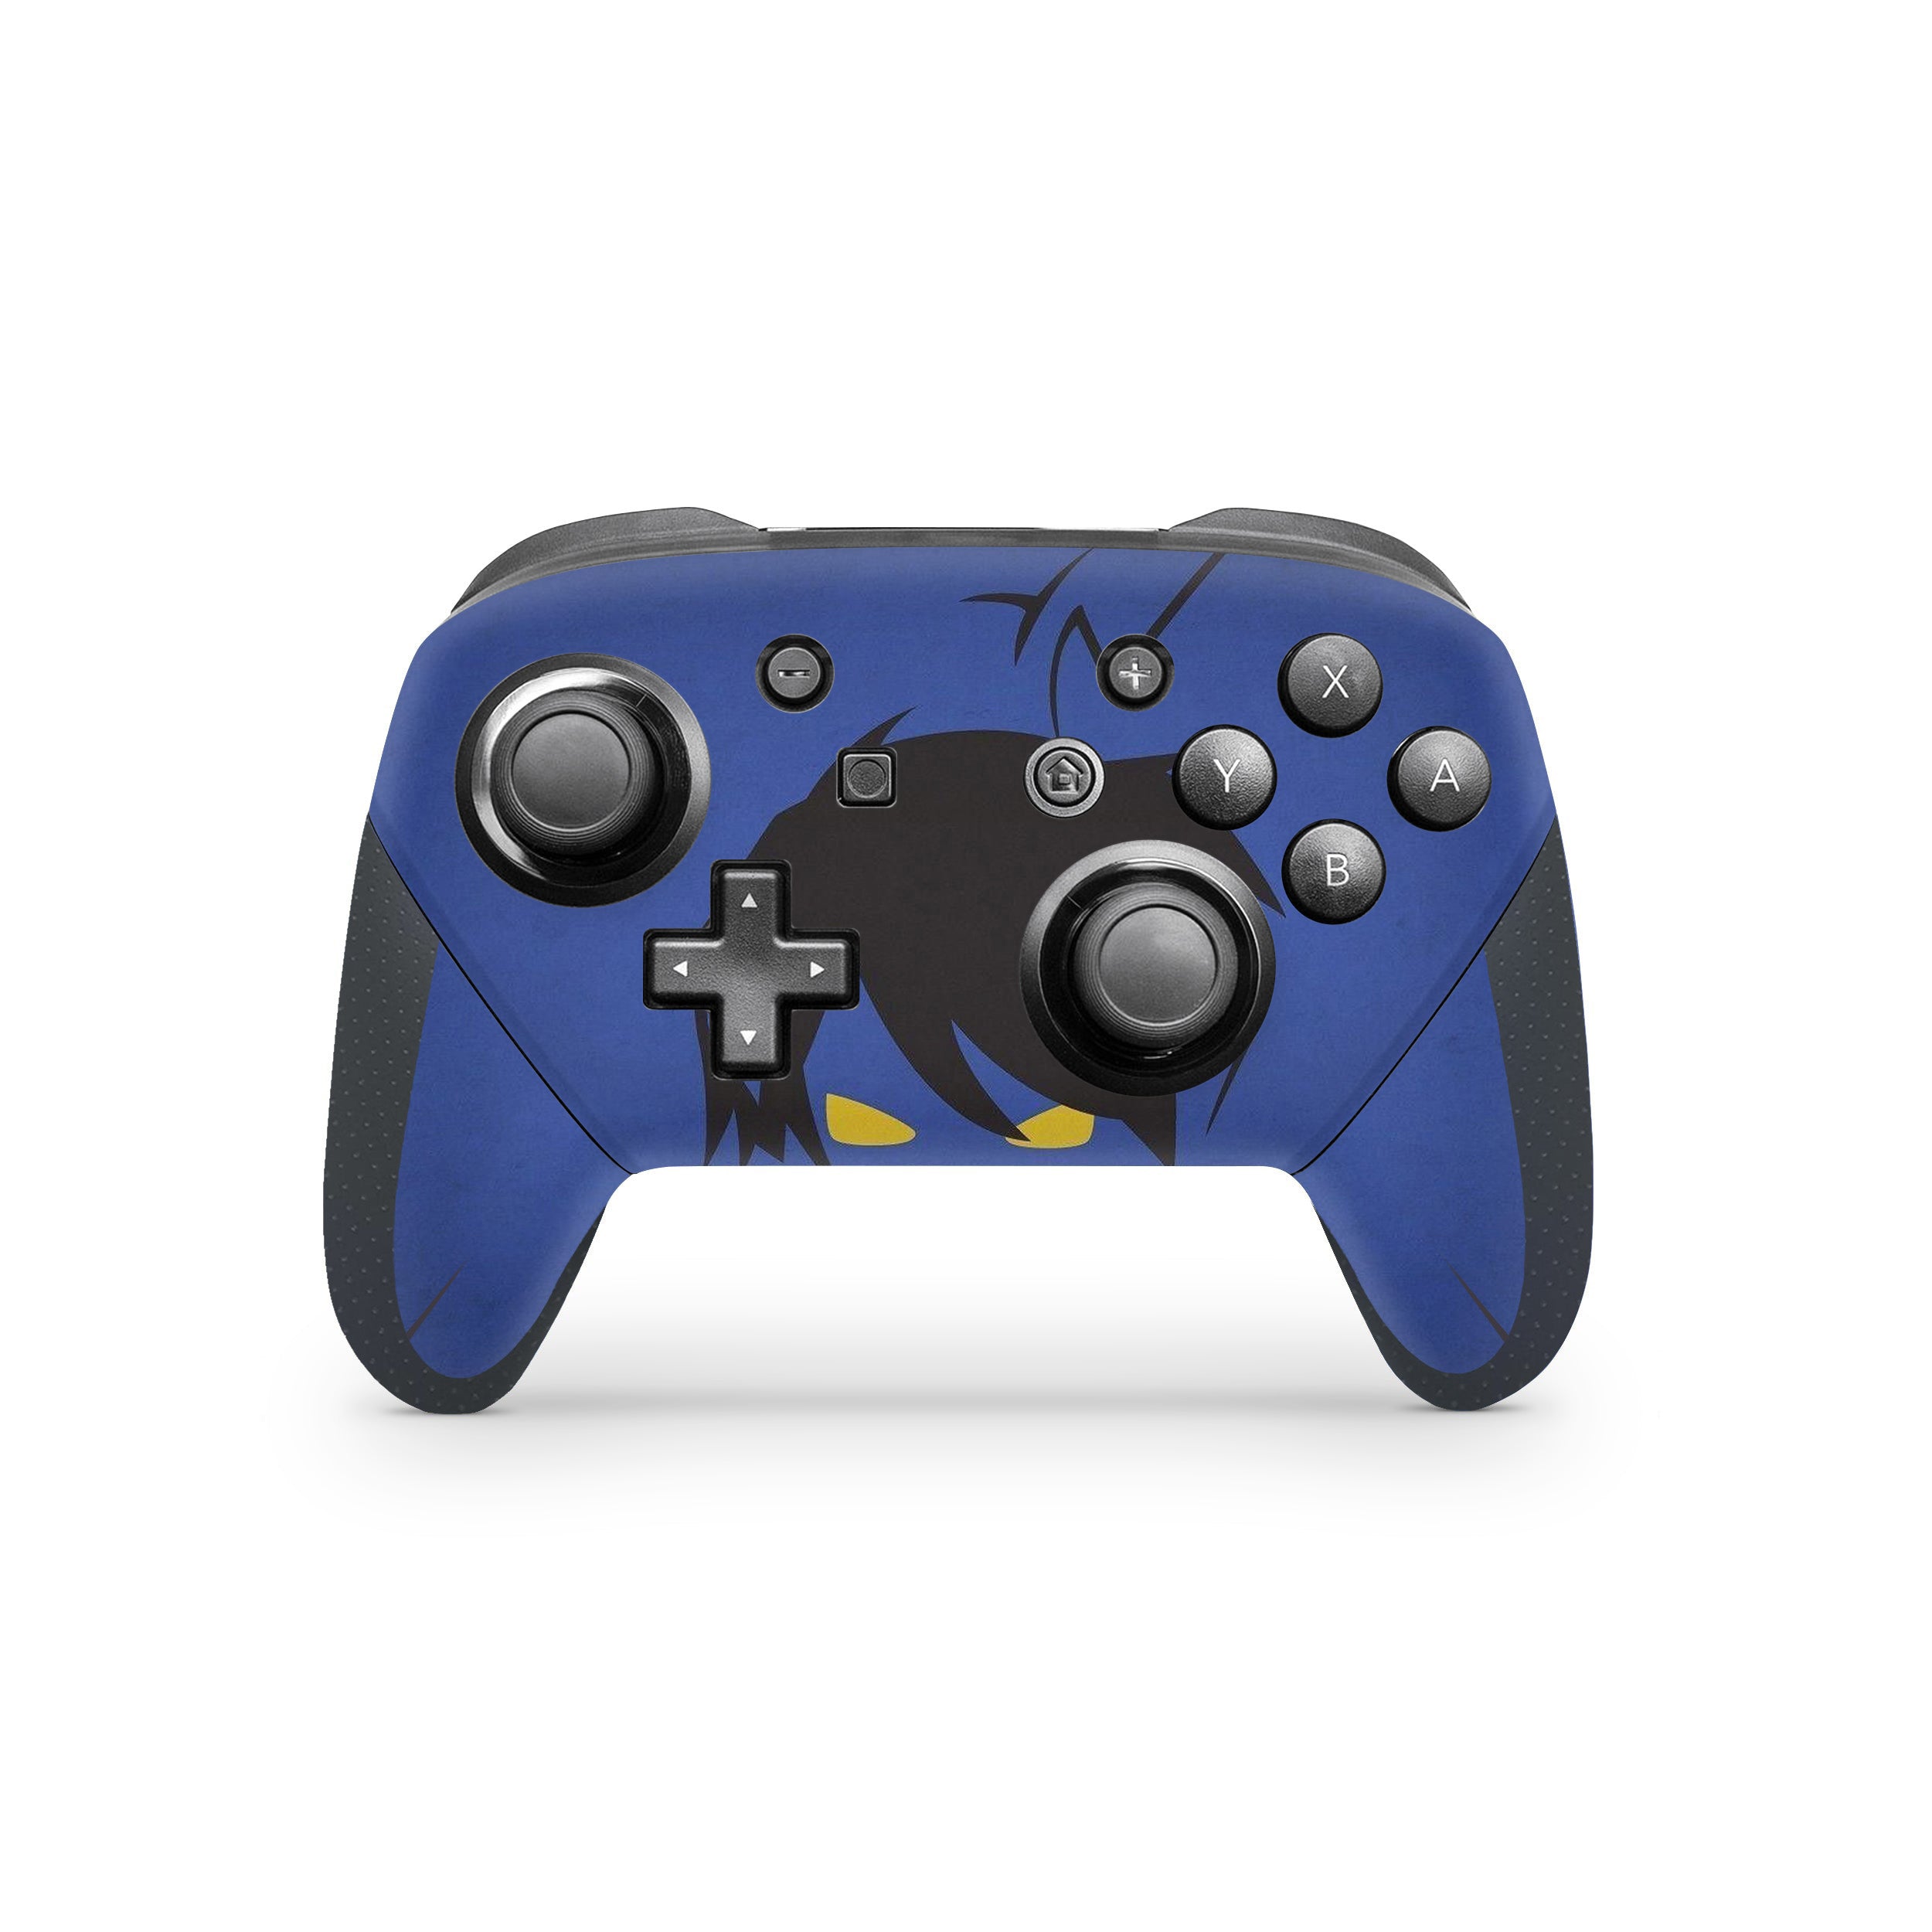 A video game skin featuring a Marvel X Men Nightcrawler design for the Switch Pro Controller.